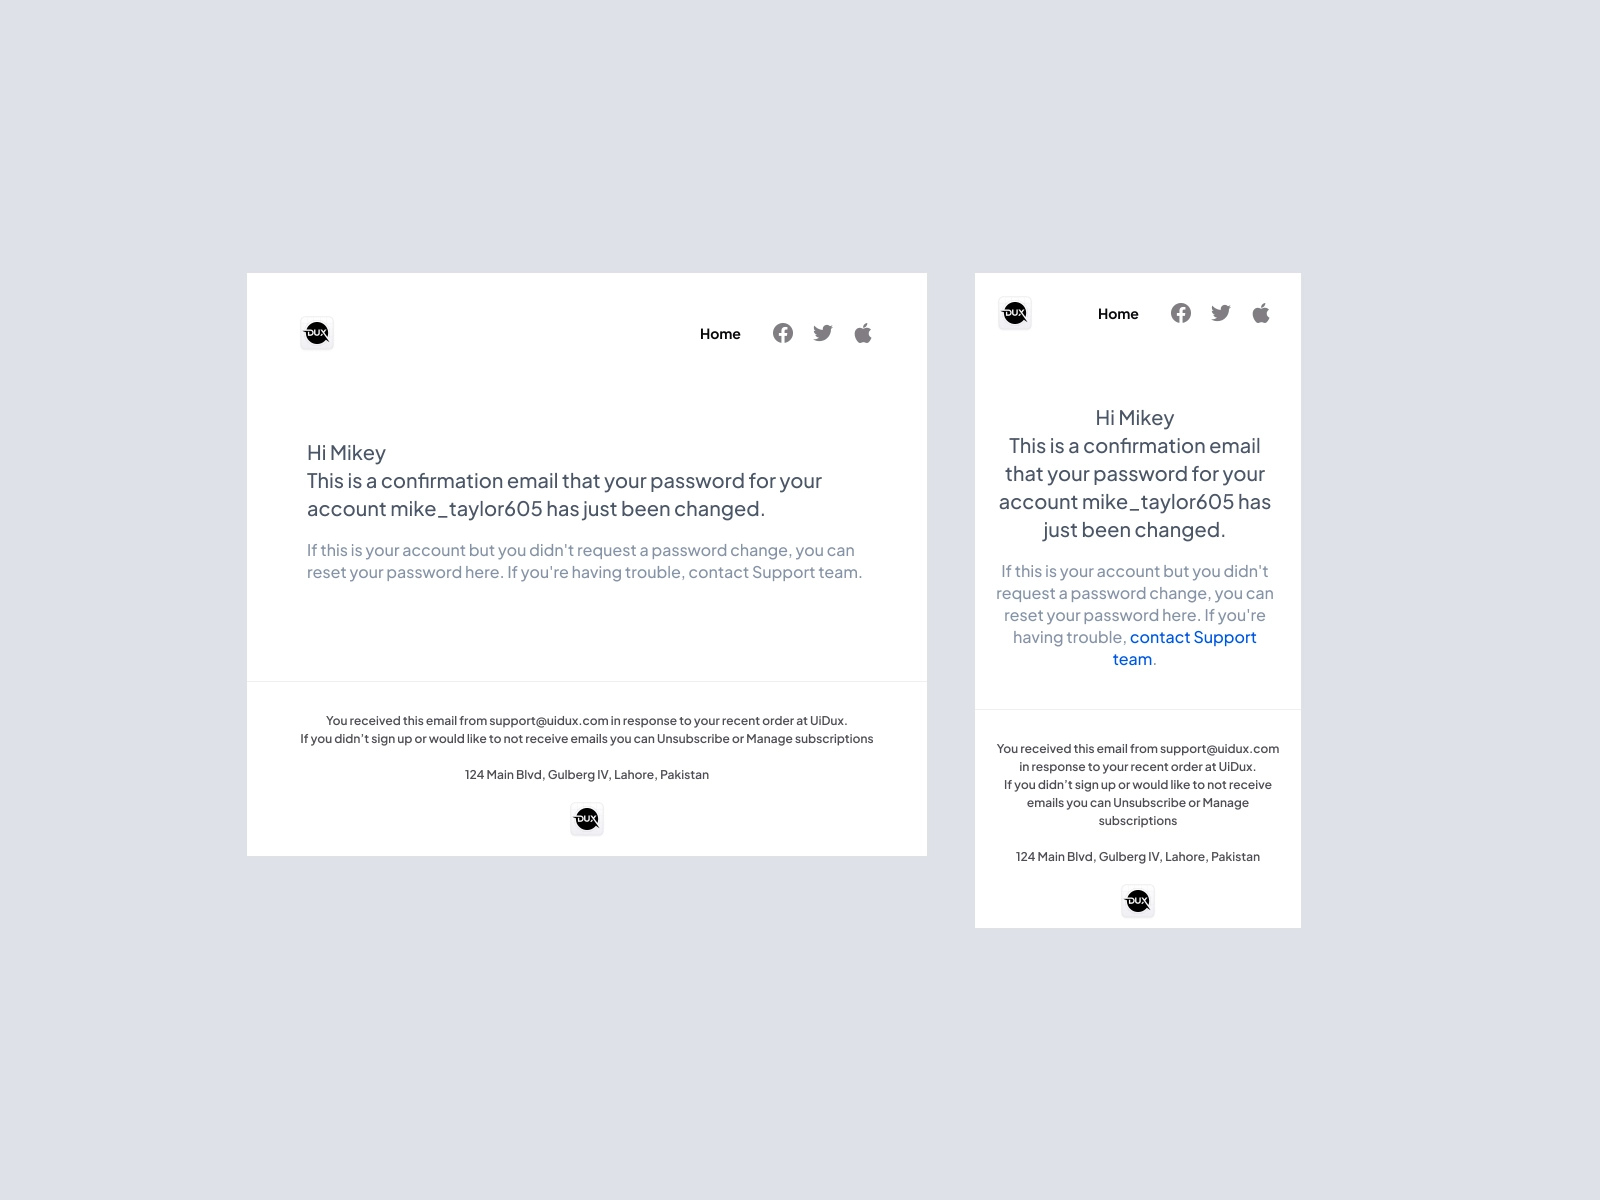 Email Design Templates - Password Changed Confirmation Email for Figma and Adobe XD - screen 2